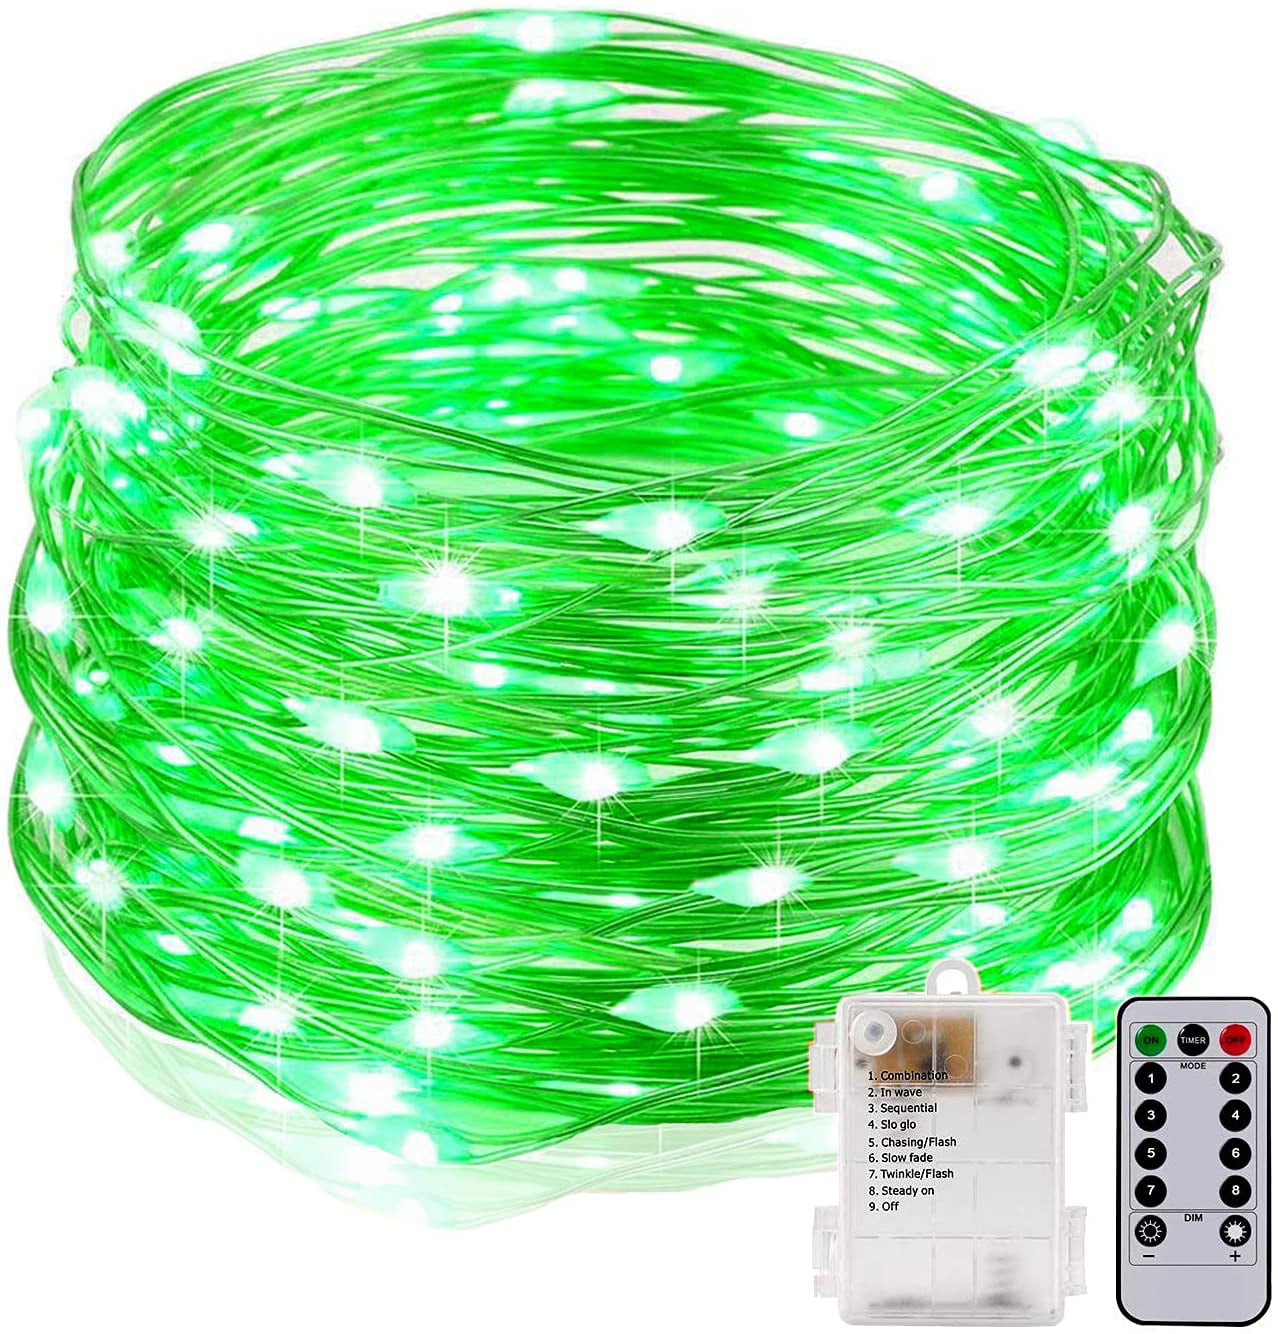 50/100/200 LED LED String Fairy Lights Copper Wire Battery Powered Waterproof US 